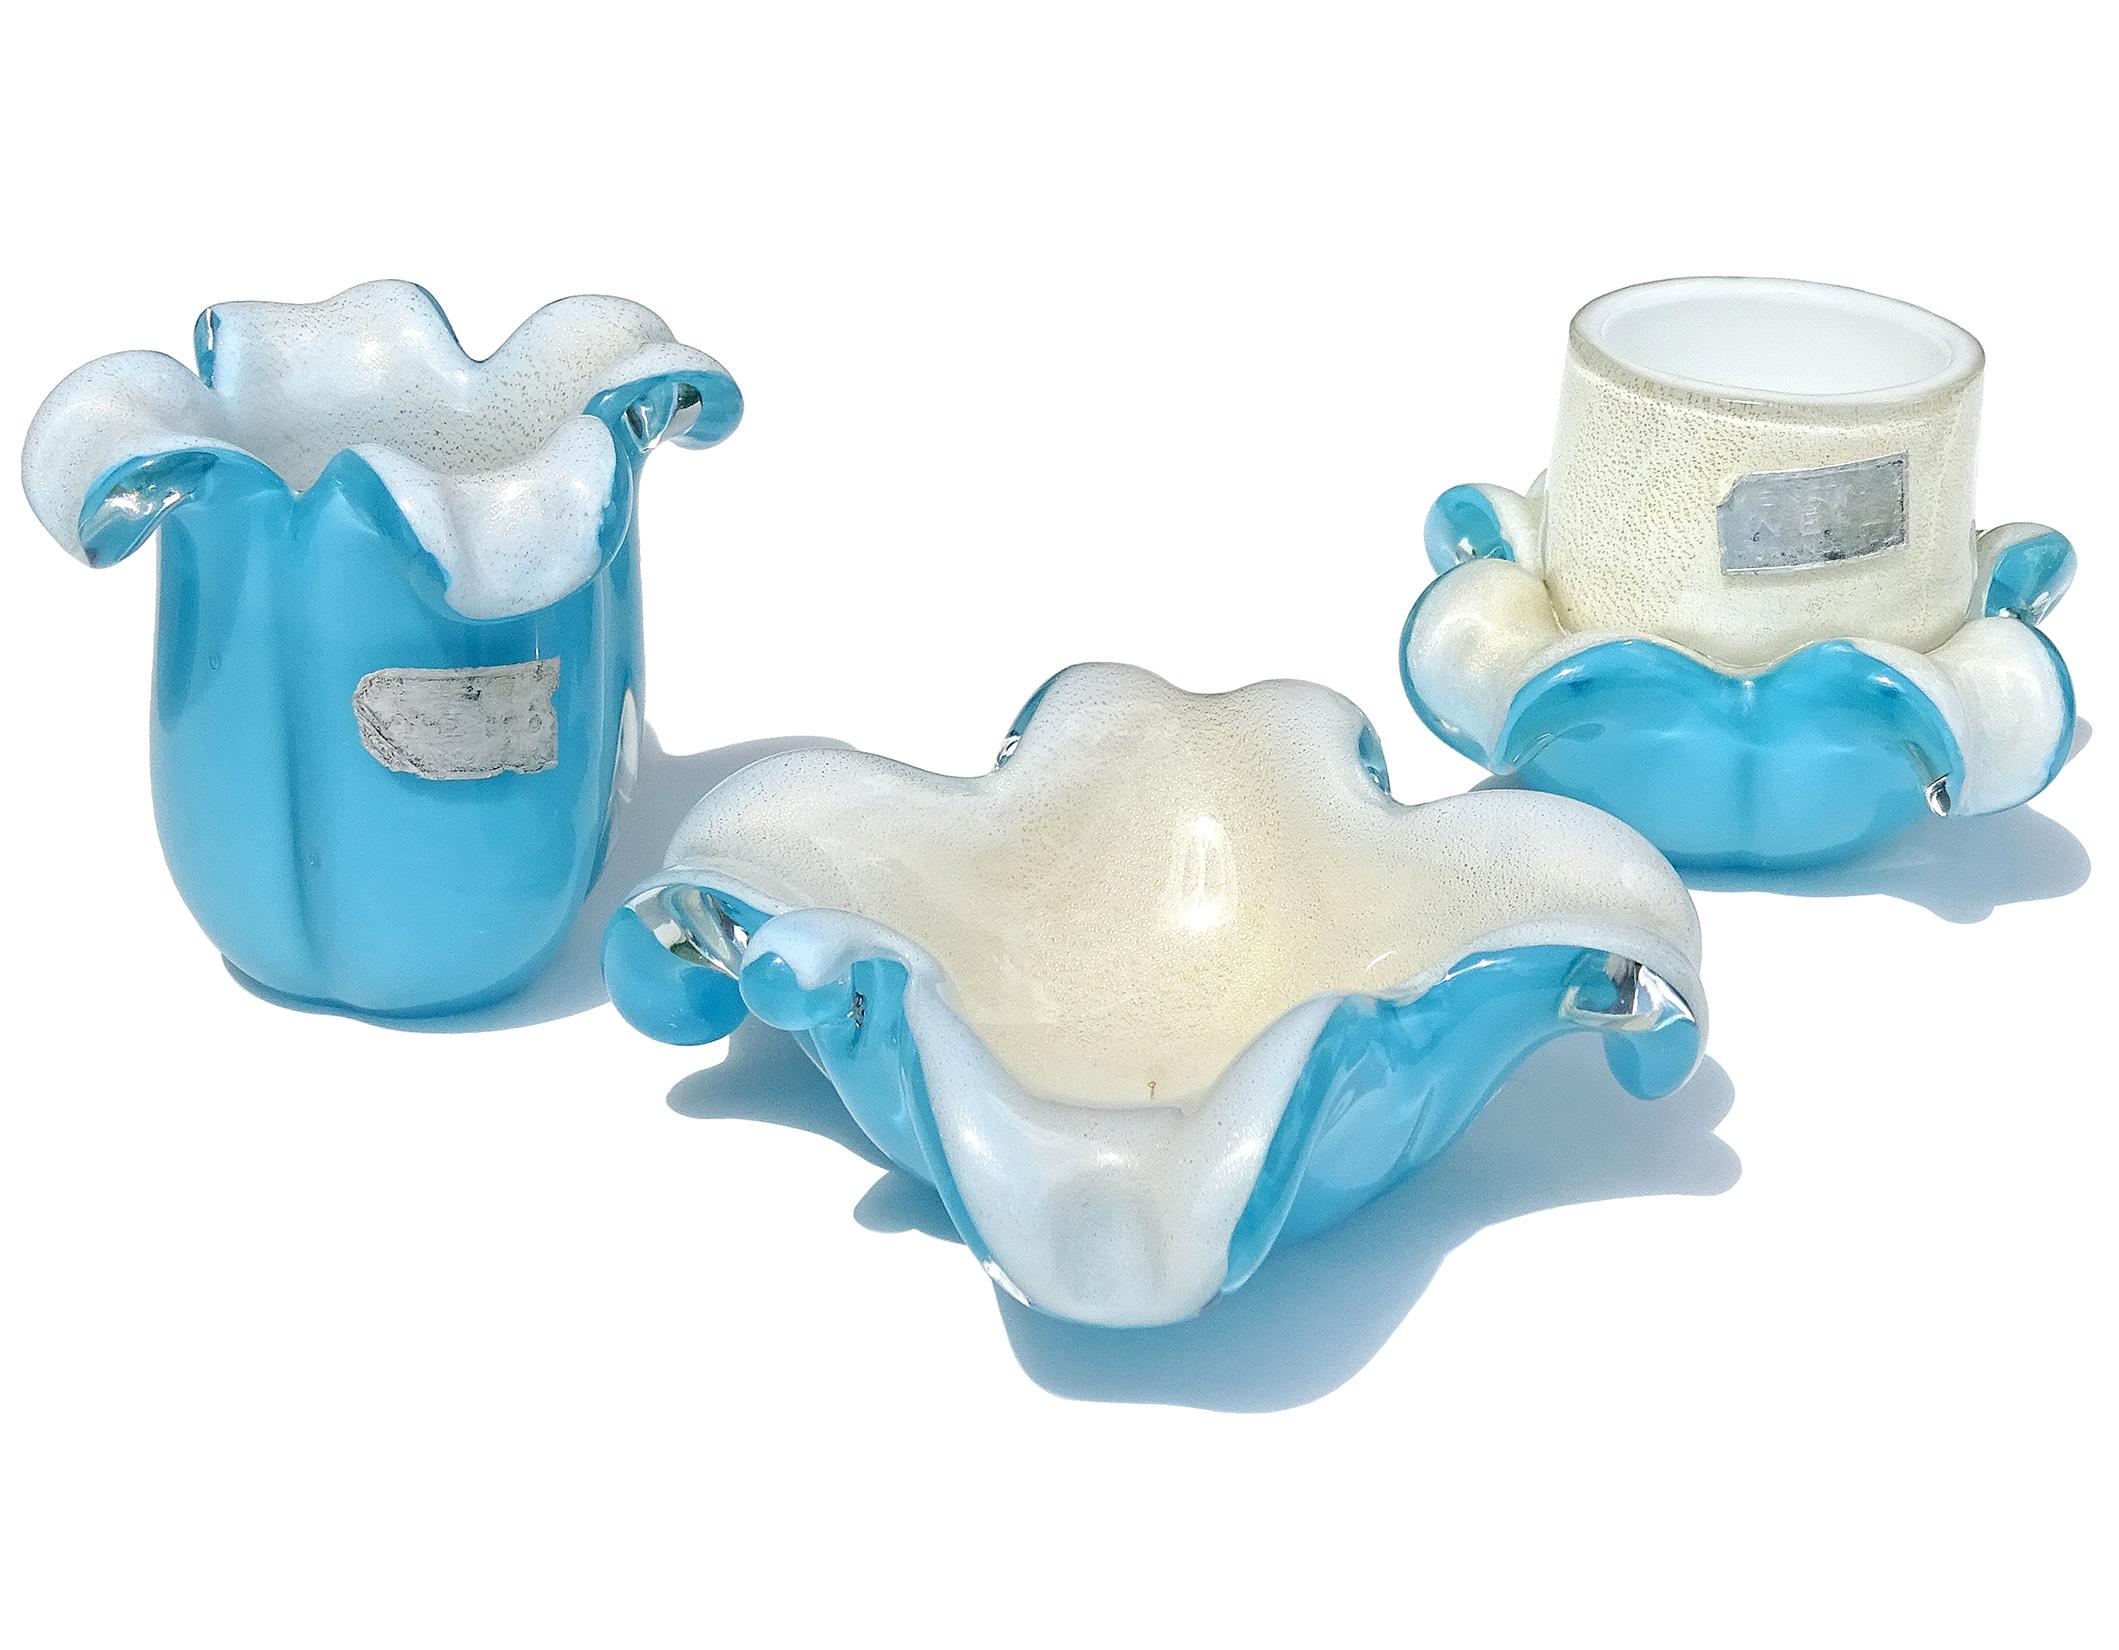 Beautiful vintage set of Murano hand blown sky blue over white and gold flecks Italian art glass leaf and flower shaped ashtray / dish, and cigarette / toothpick holders. Documented to designer Alfredo Barbini, and published in his Weil Ceramics and